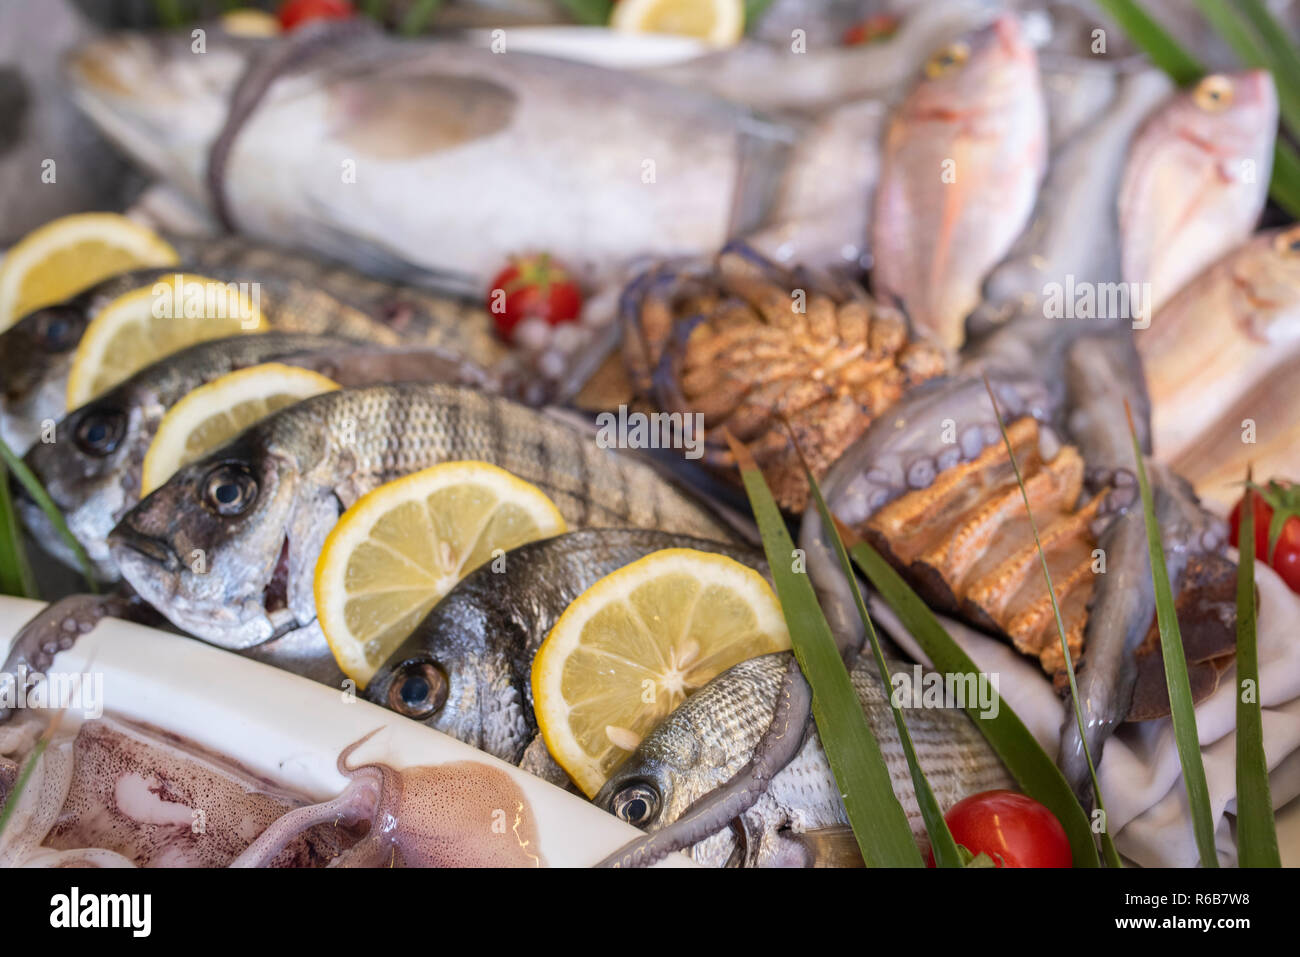 Lobster, octopus, cuttlefish, squid, calamari, red mullet, grouper, sea bass, sea bream, bogue fish, crab and prawns on ice at the supermarket Stock Photo